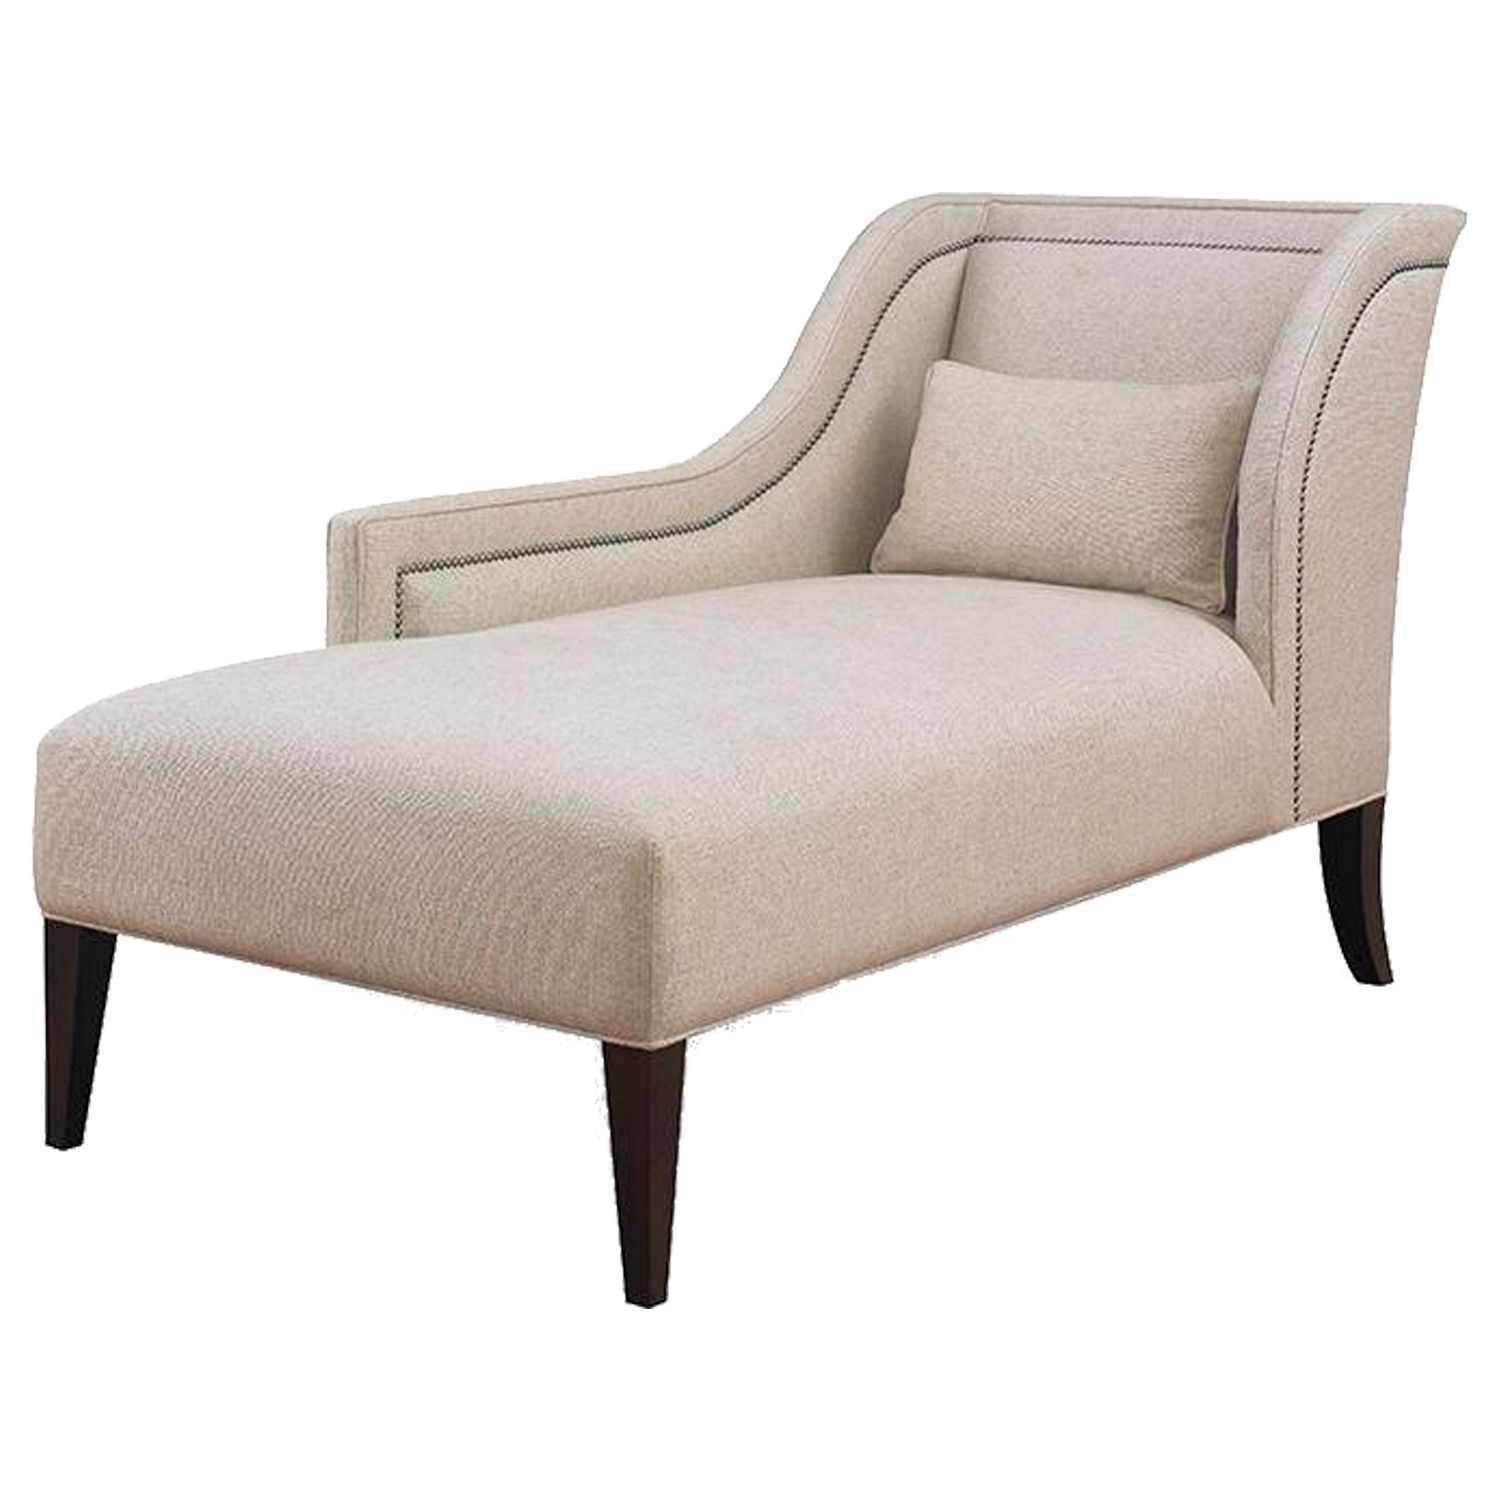 Buy Pasadena One Arm Chaisekravet – Made To Order Designer With Regard To Current Chaise Lounges With Arms (Photo 15 of 15)